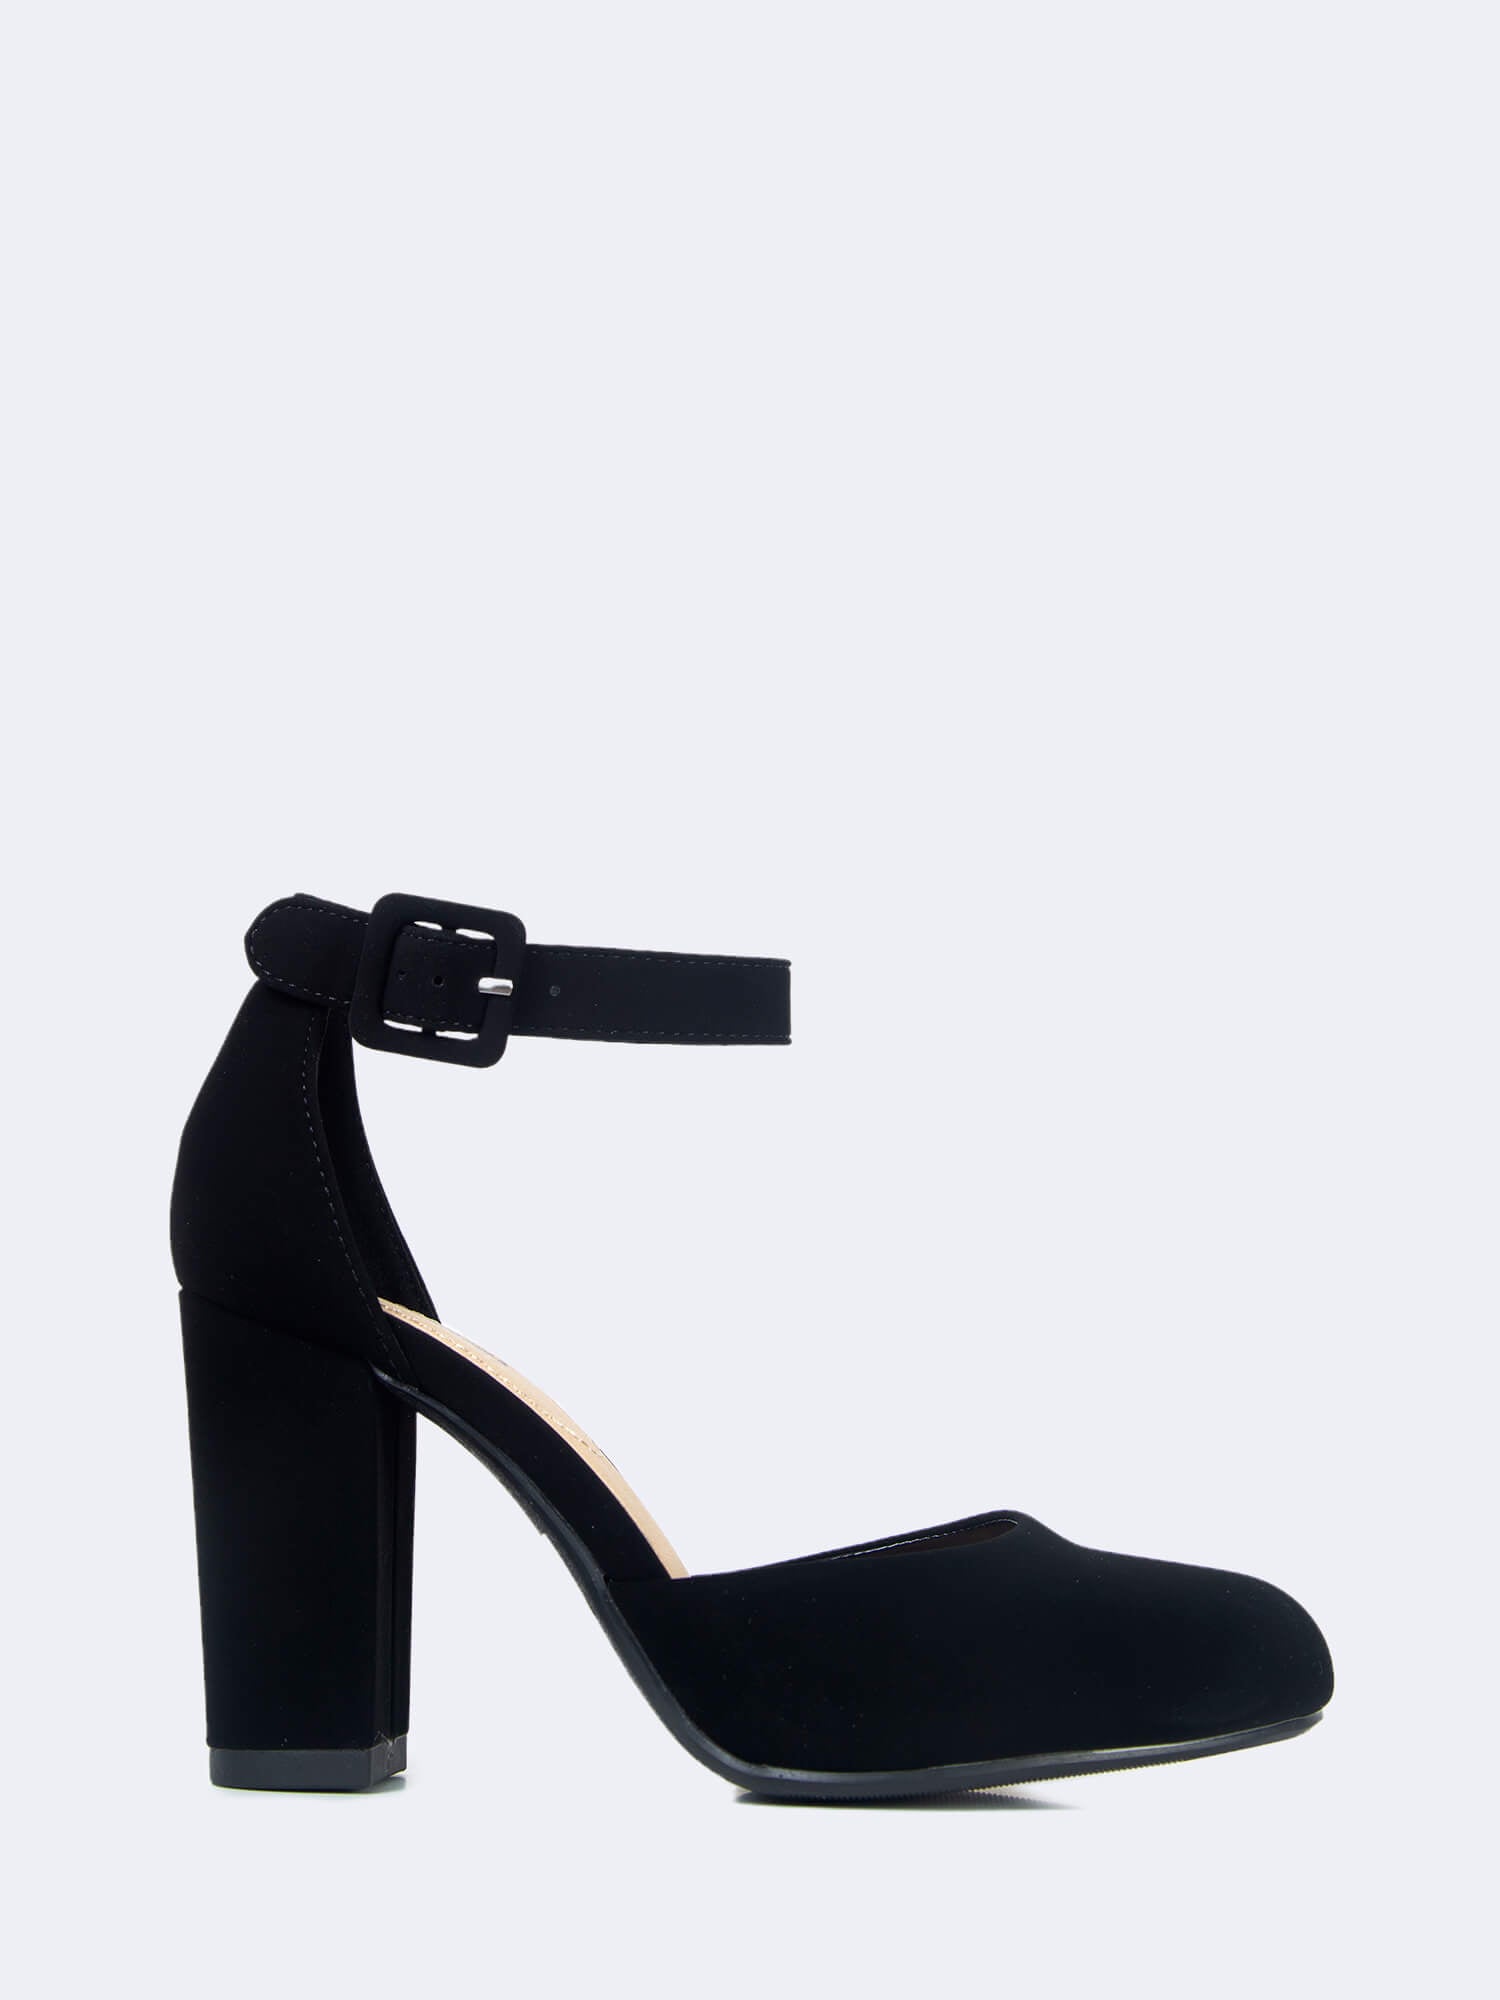 Round Closed Toe Ankle Strap Chunky High Heel